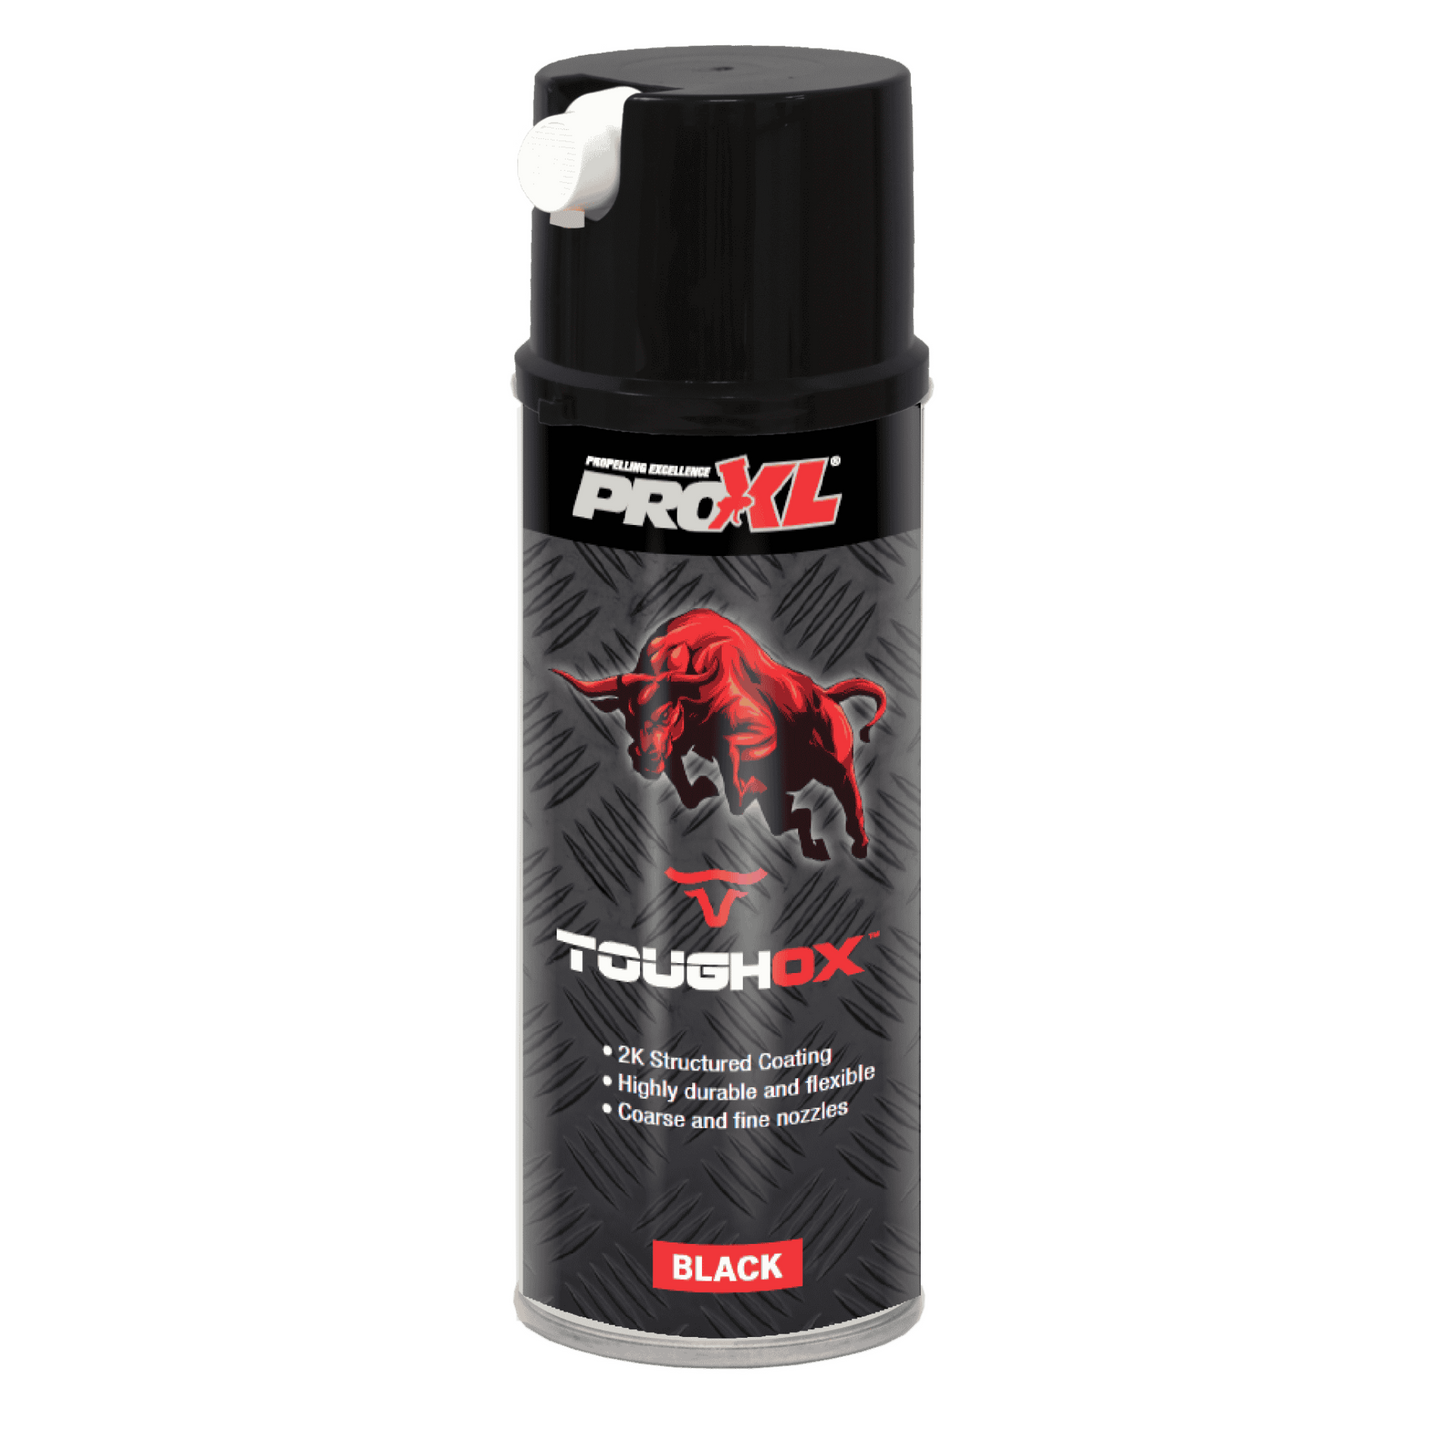 ToughOx truck bed liner spray black